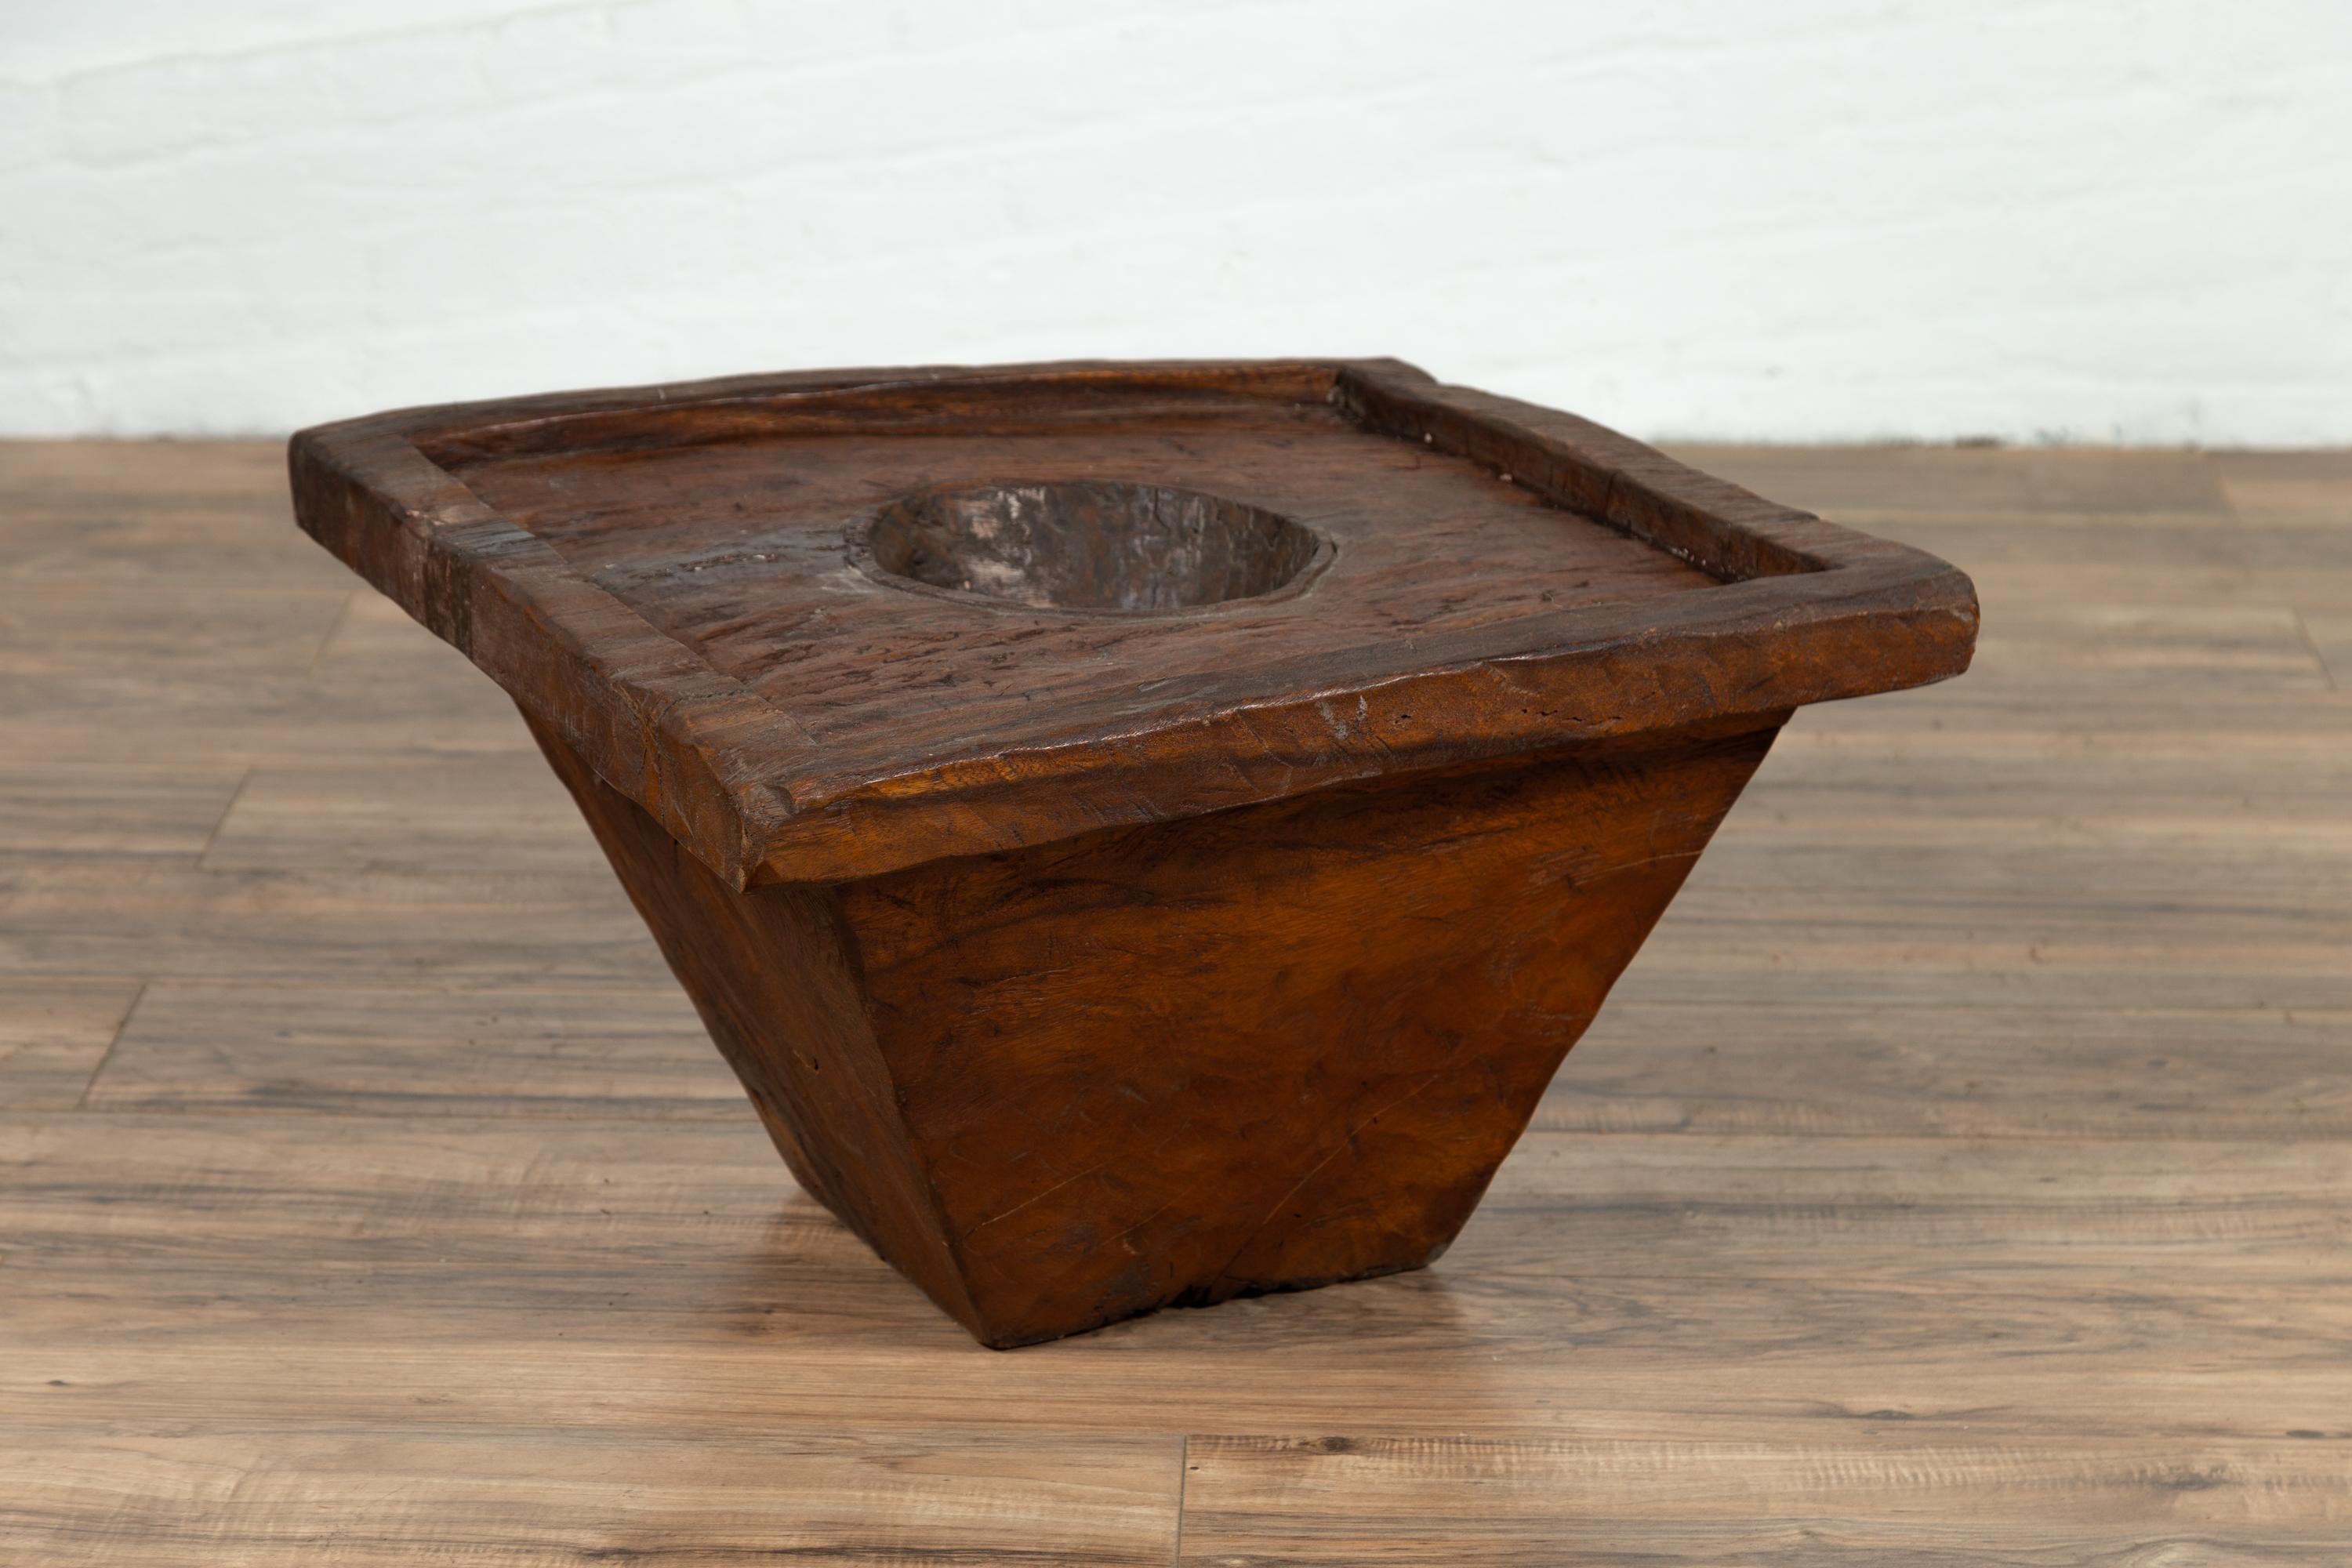 Wooden Indonesian Brown Mortar Planter from the Early 20th Century For Sale 3